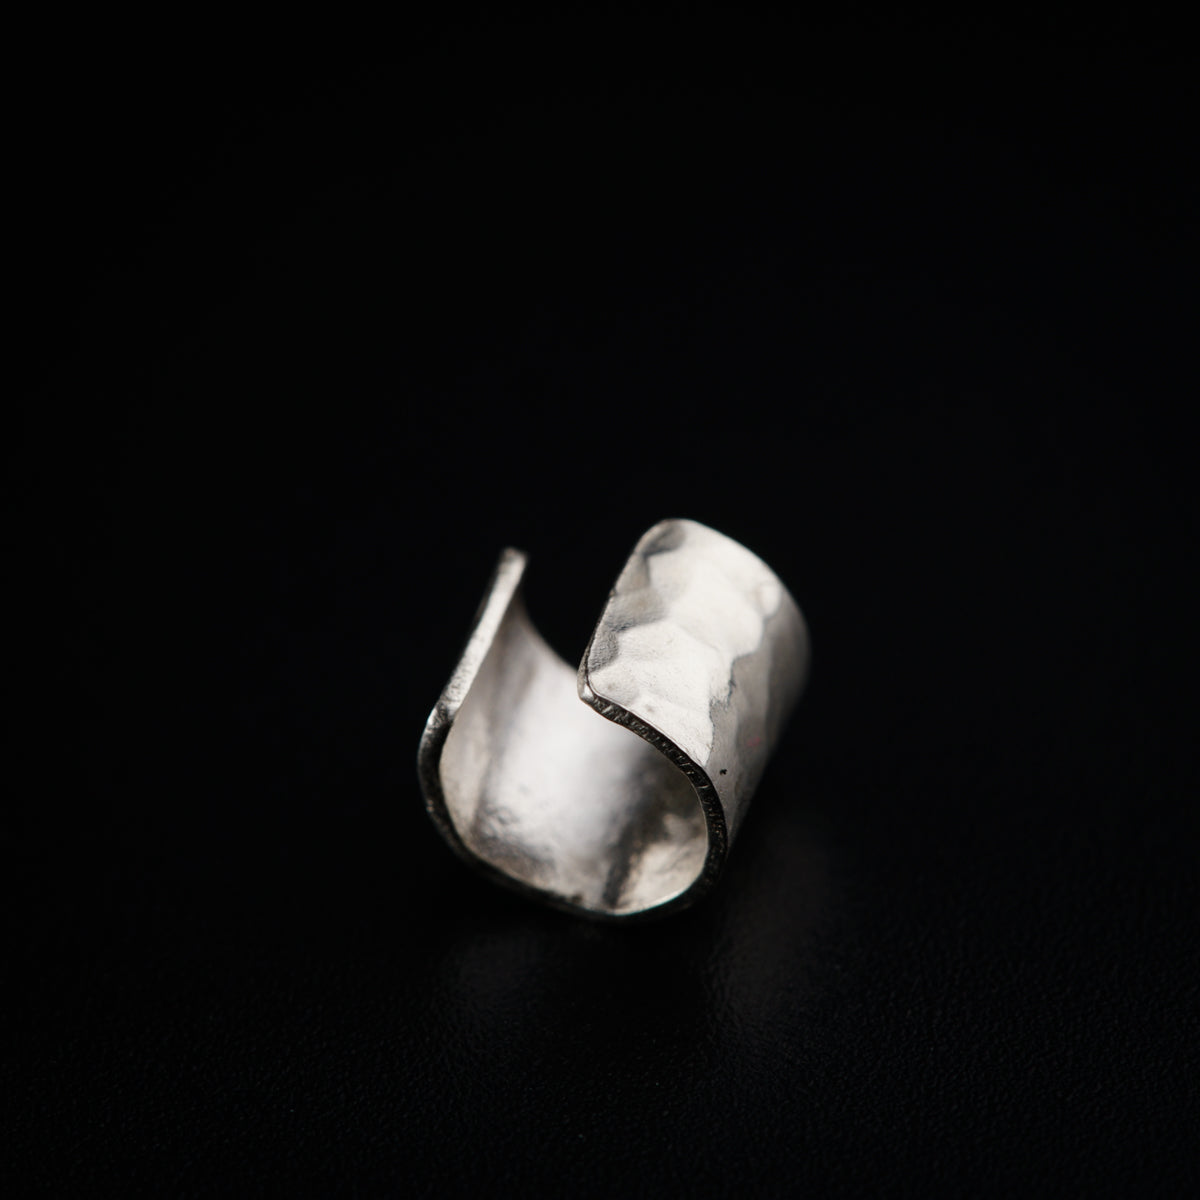 a close up of a silver ring on a black surface